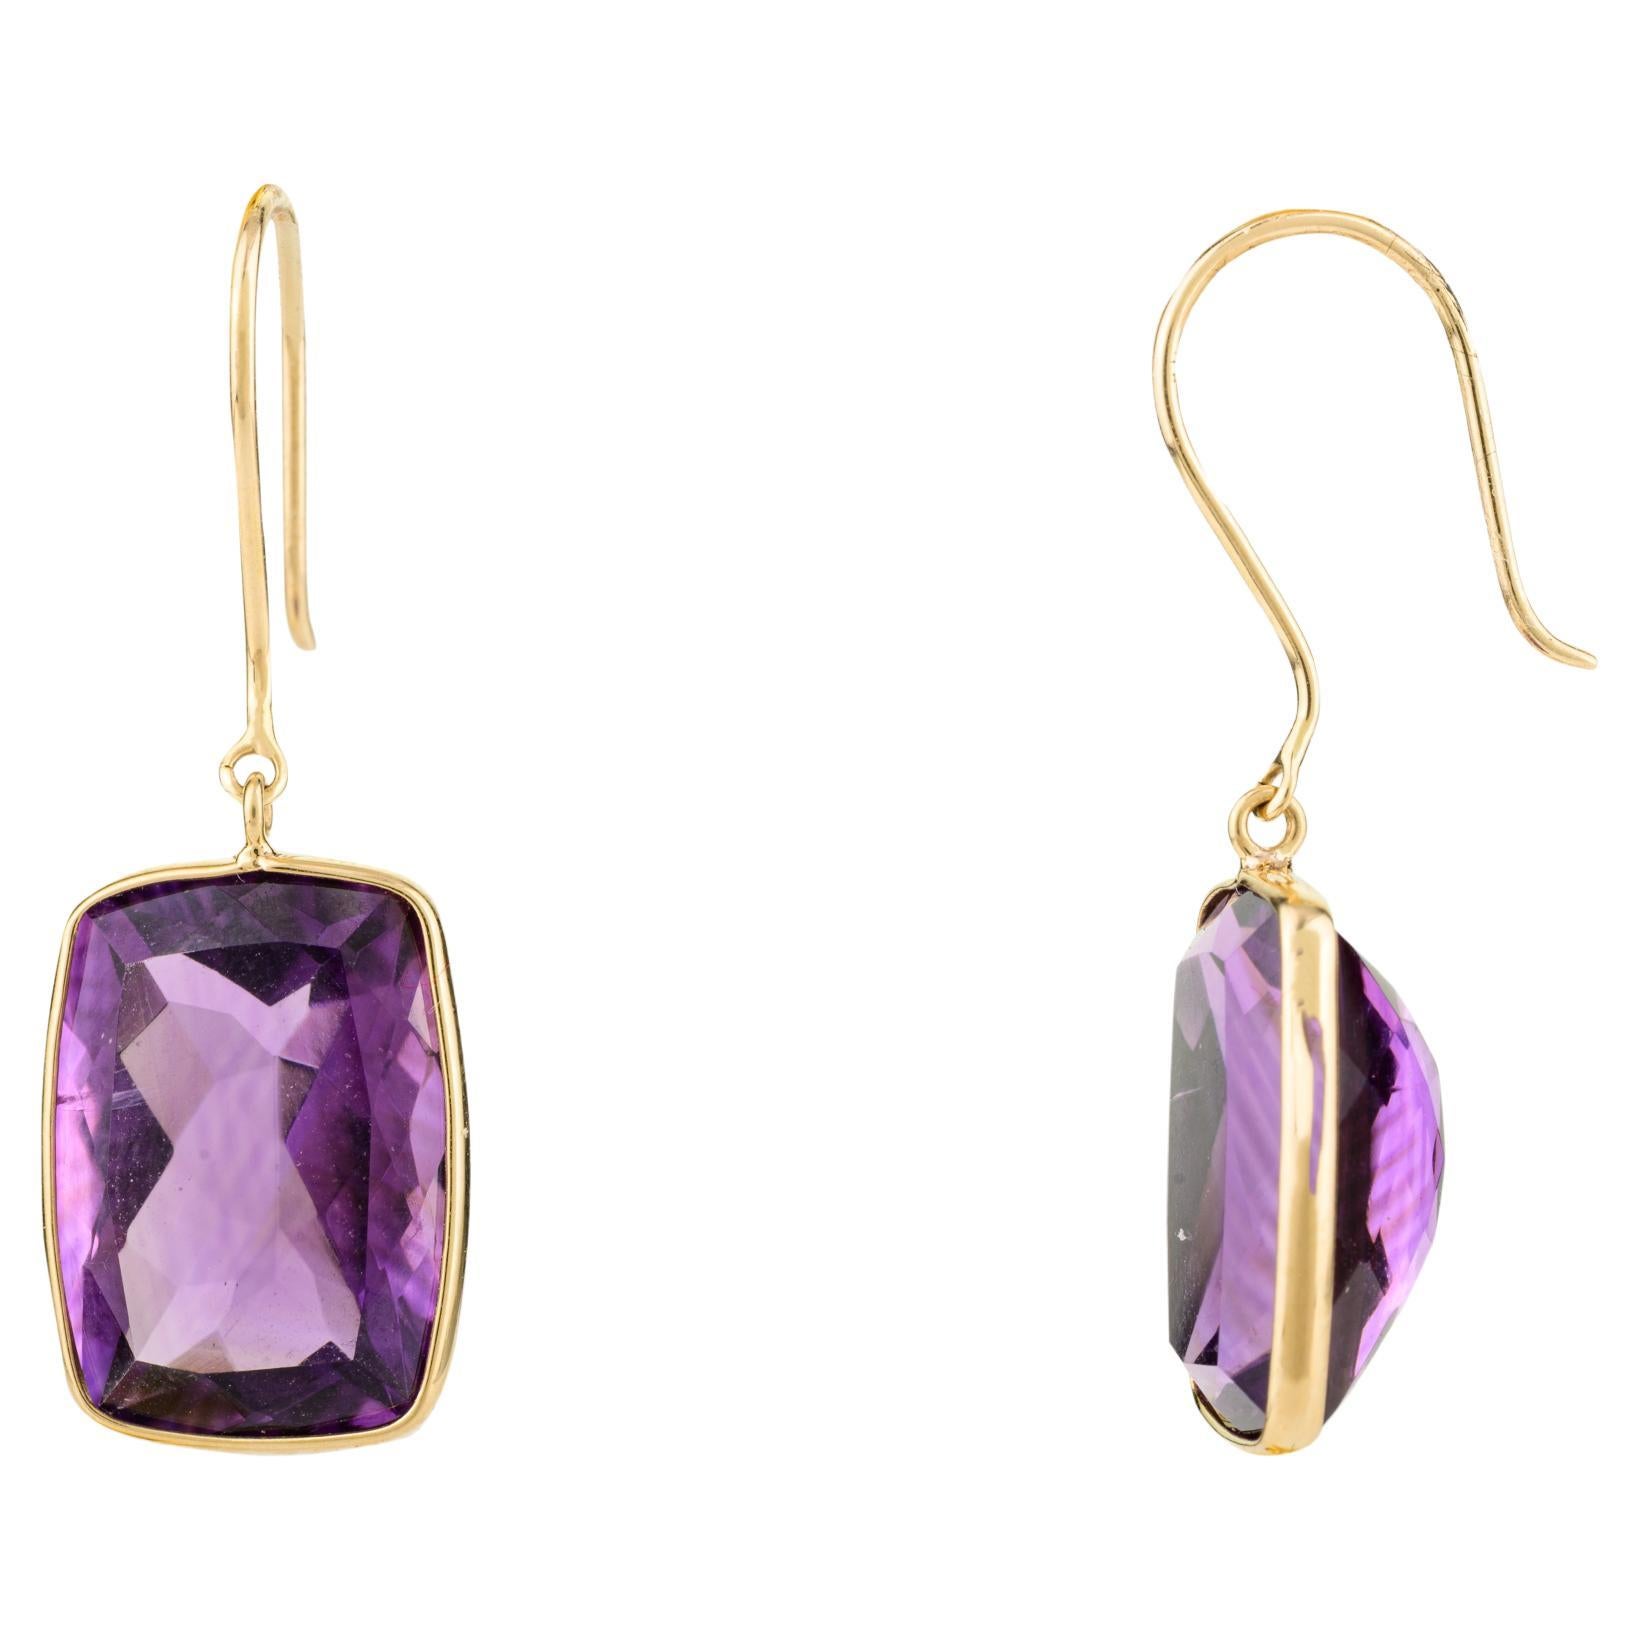 Handmade Amethyst Drop Earrings Gift for Mom in 18k Solid Yellow Gold For Sale